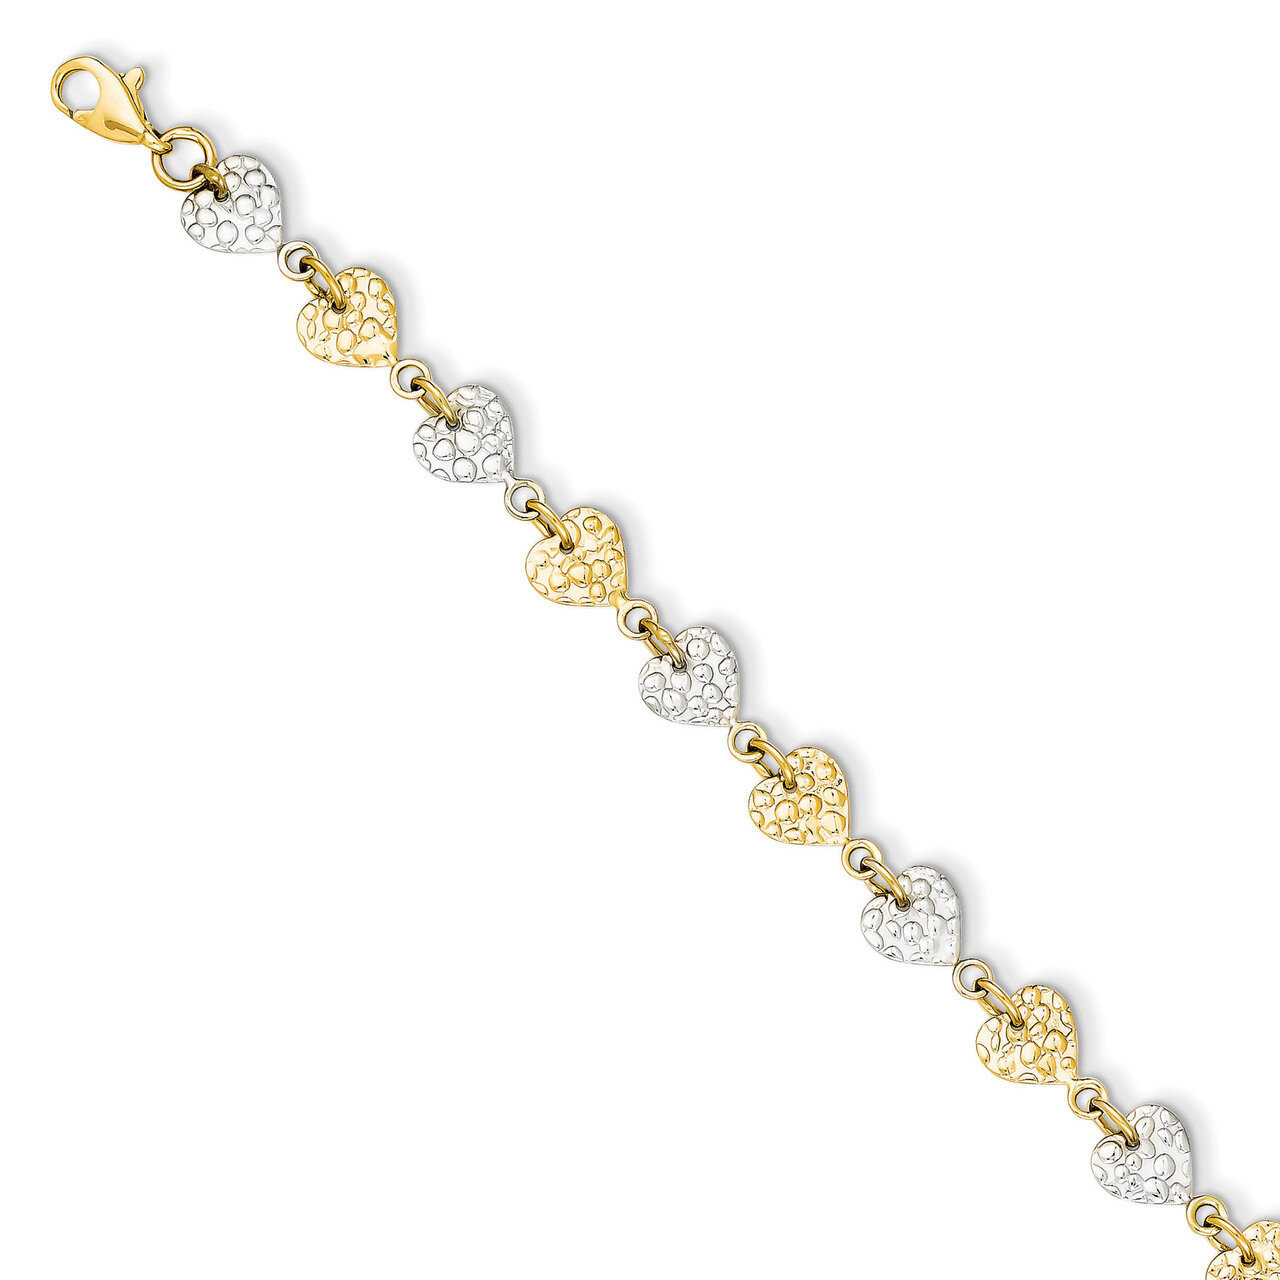 Hammered Hearts Bracelet 7 Inch 14k Two-Tone Gold SF1582-7